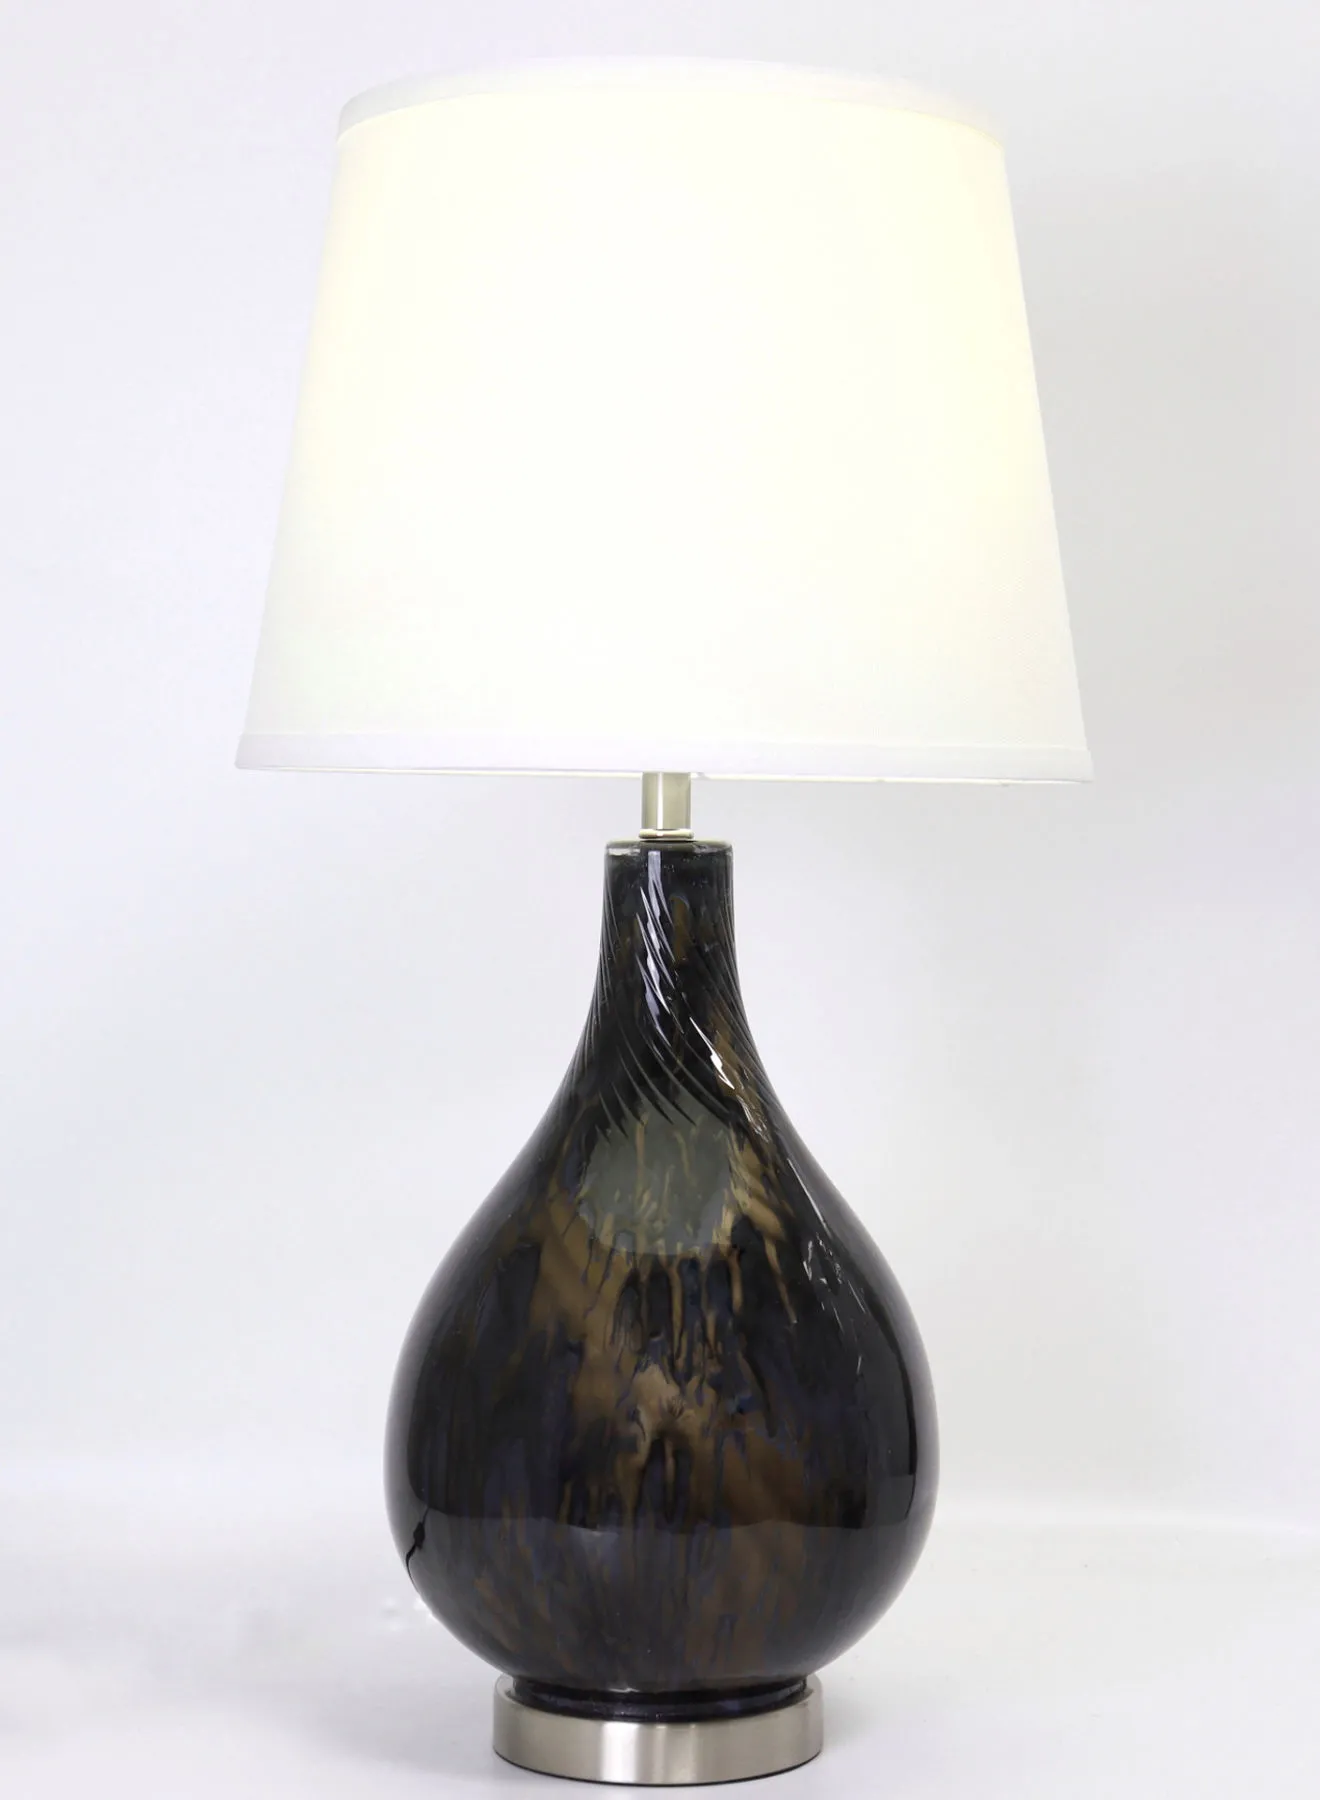 ebb & flow Modern Design Glass Table Lamp Unique Luxury Quality Material for the Perfect Stylish Home RSN71054-B Yellow/Black 13 x 24.5